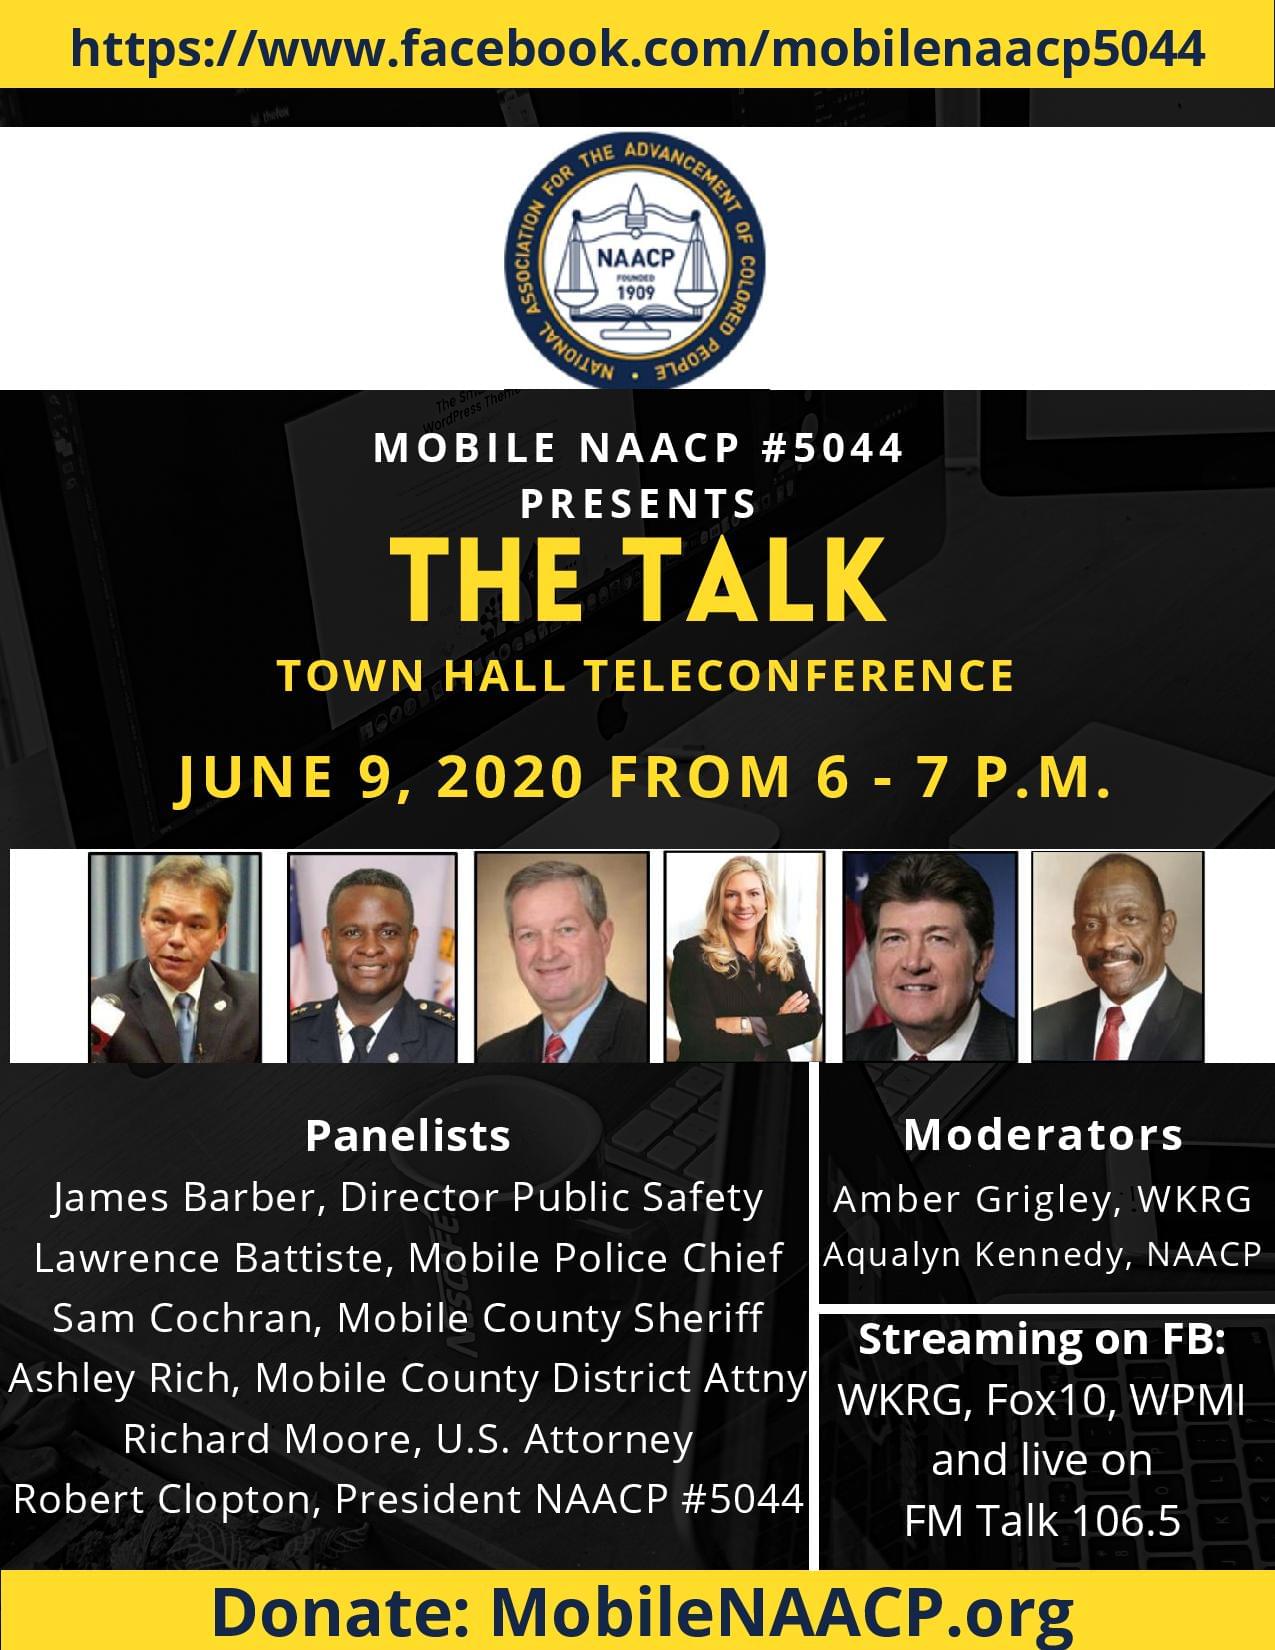 THE CITY OF MOBILE COMES TOGETHER TO TALK